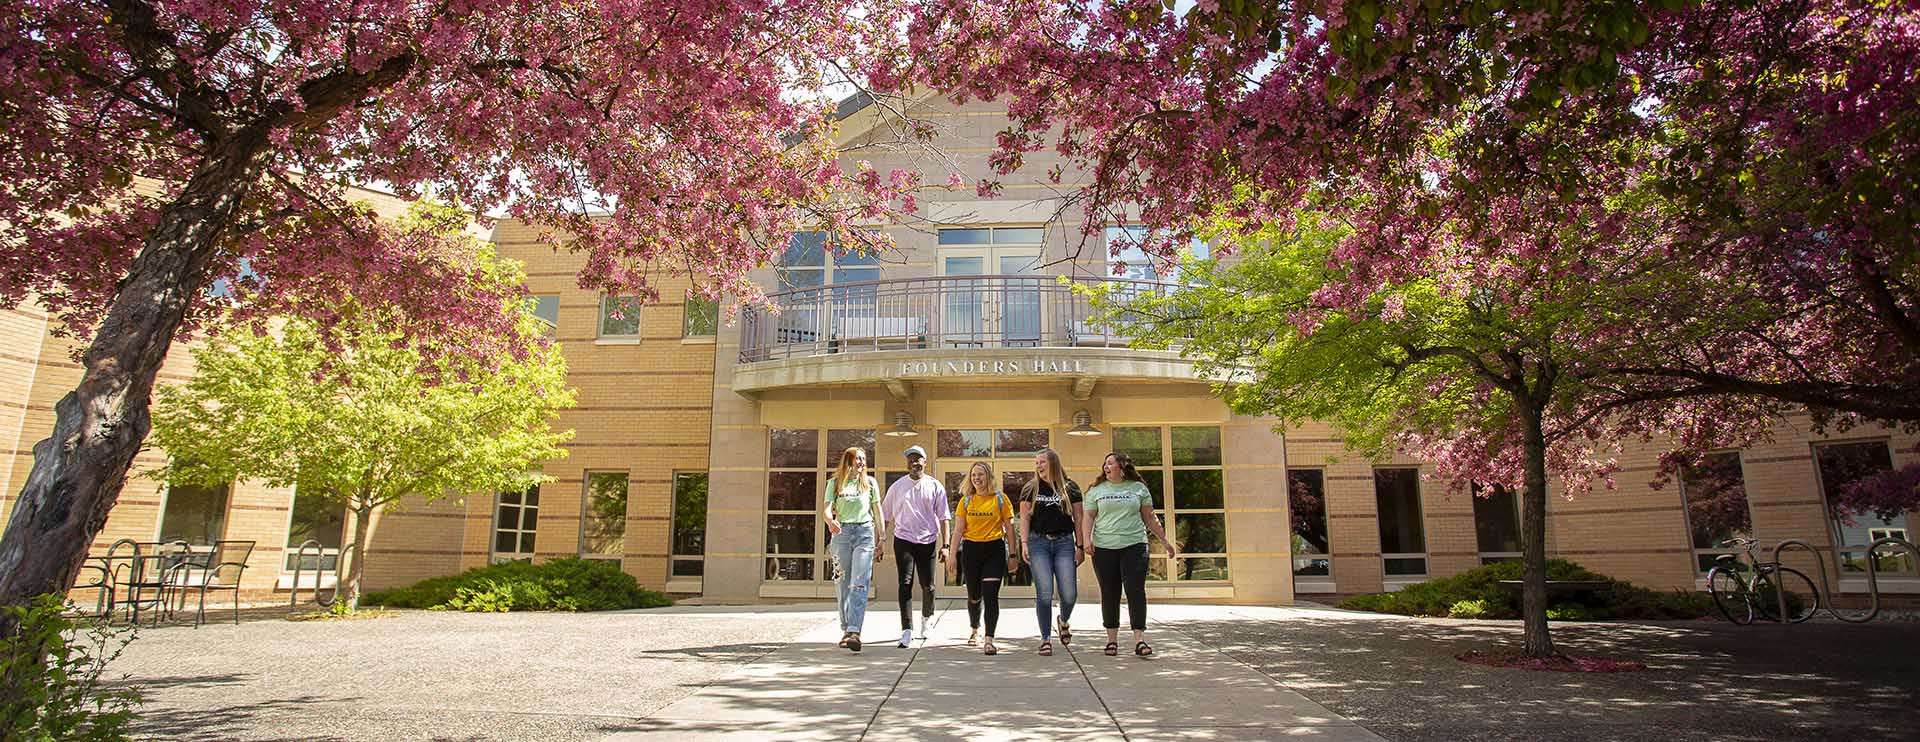 Students on campus at Sheridan College